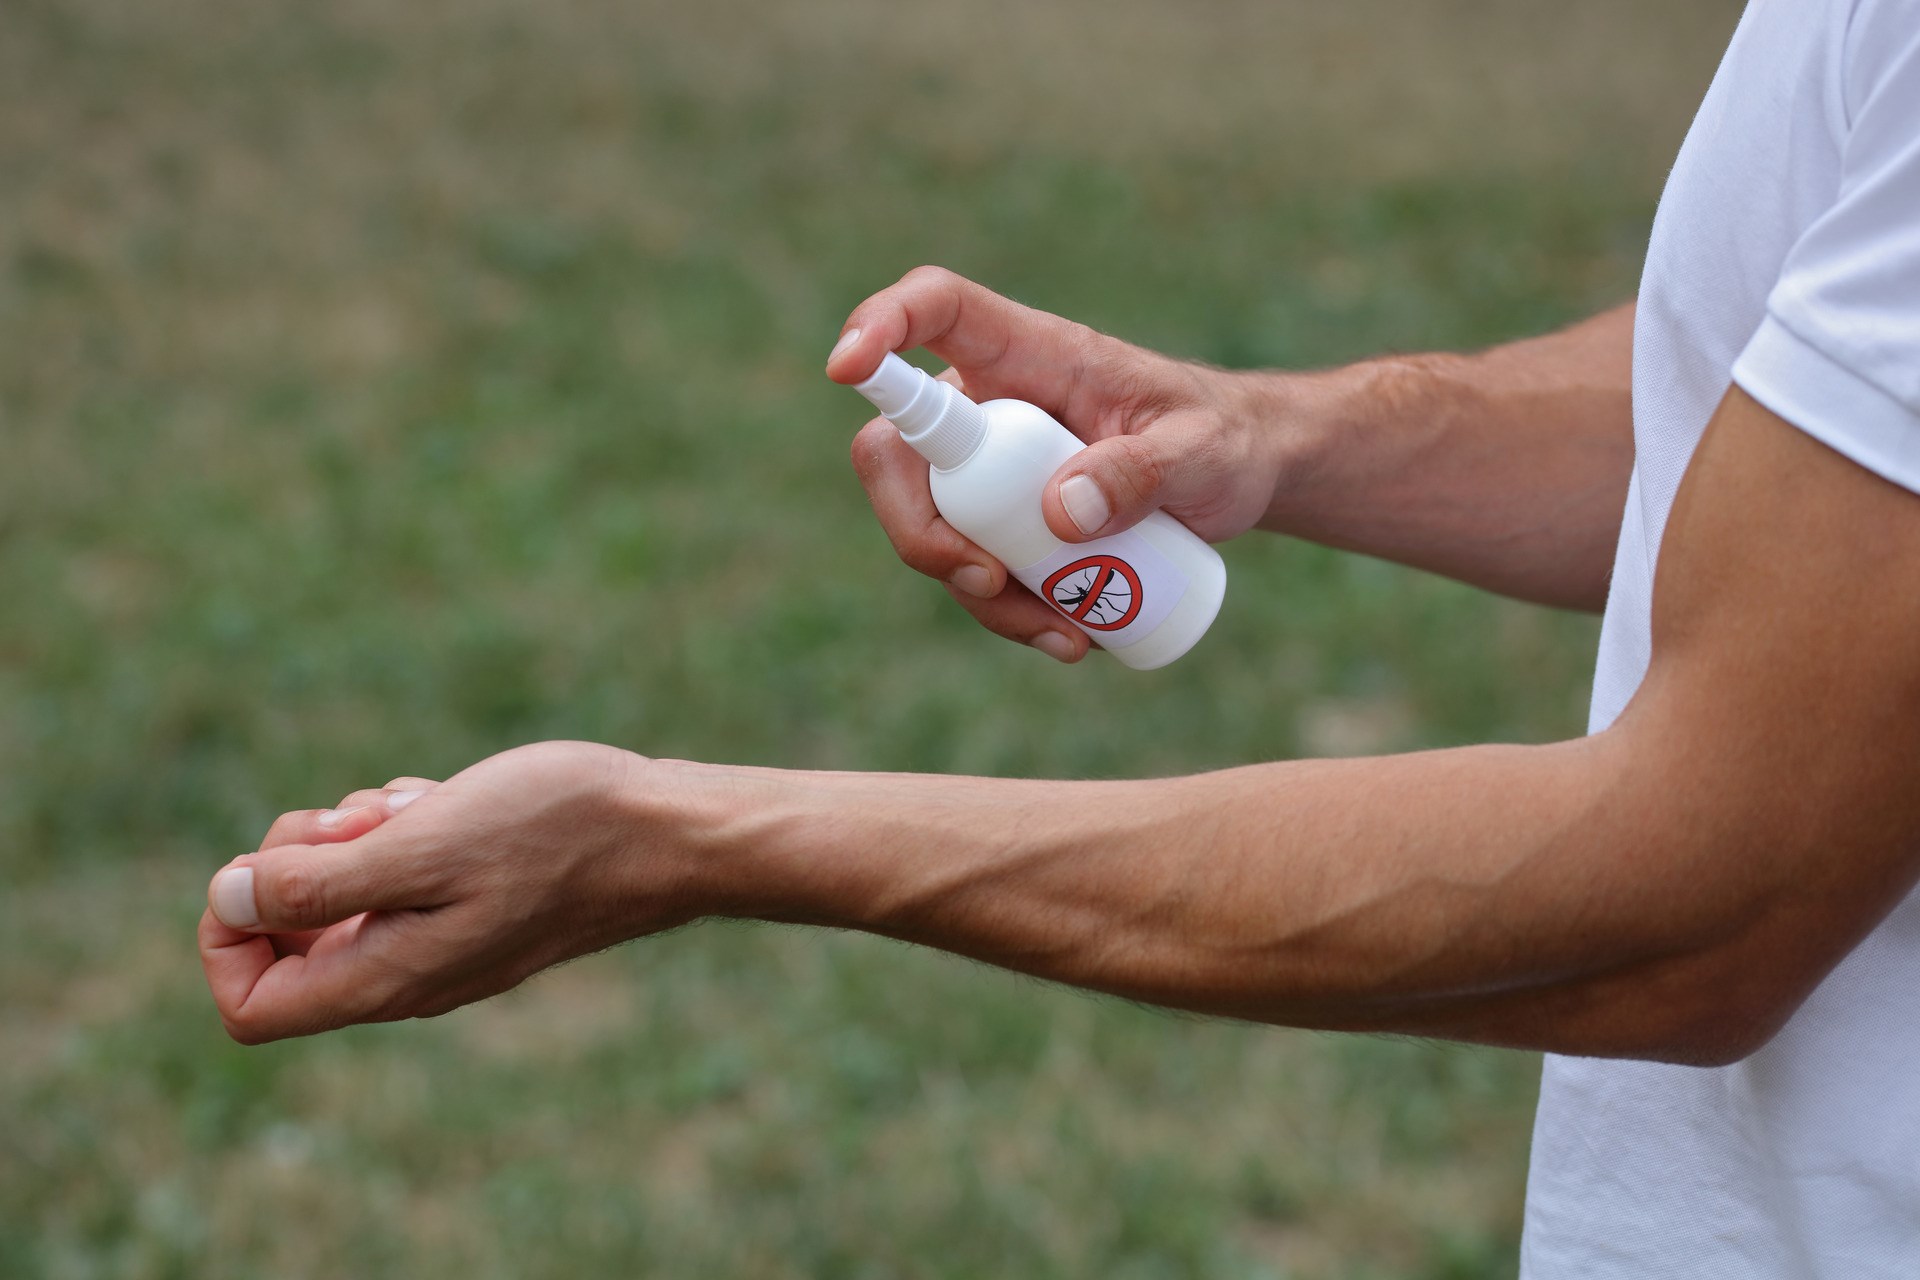 Mosquito repellent. Man using insect repellent spray outdoors.